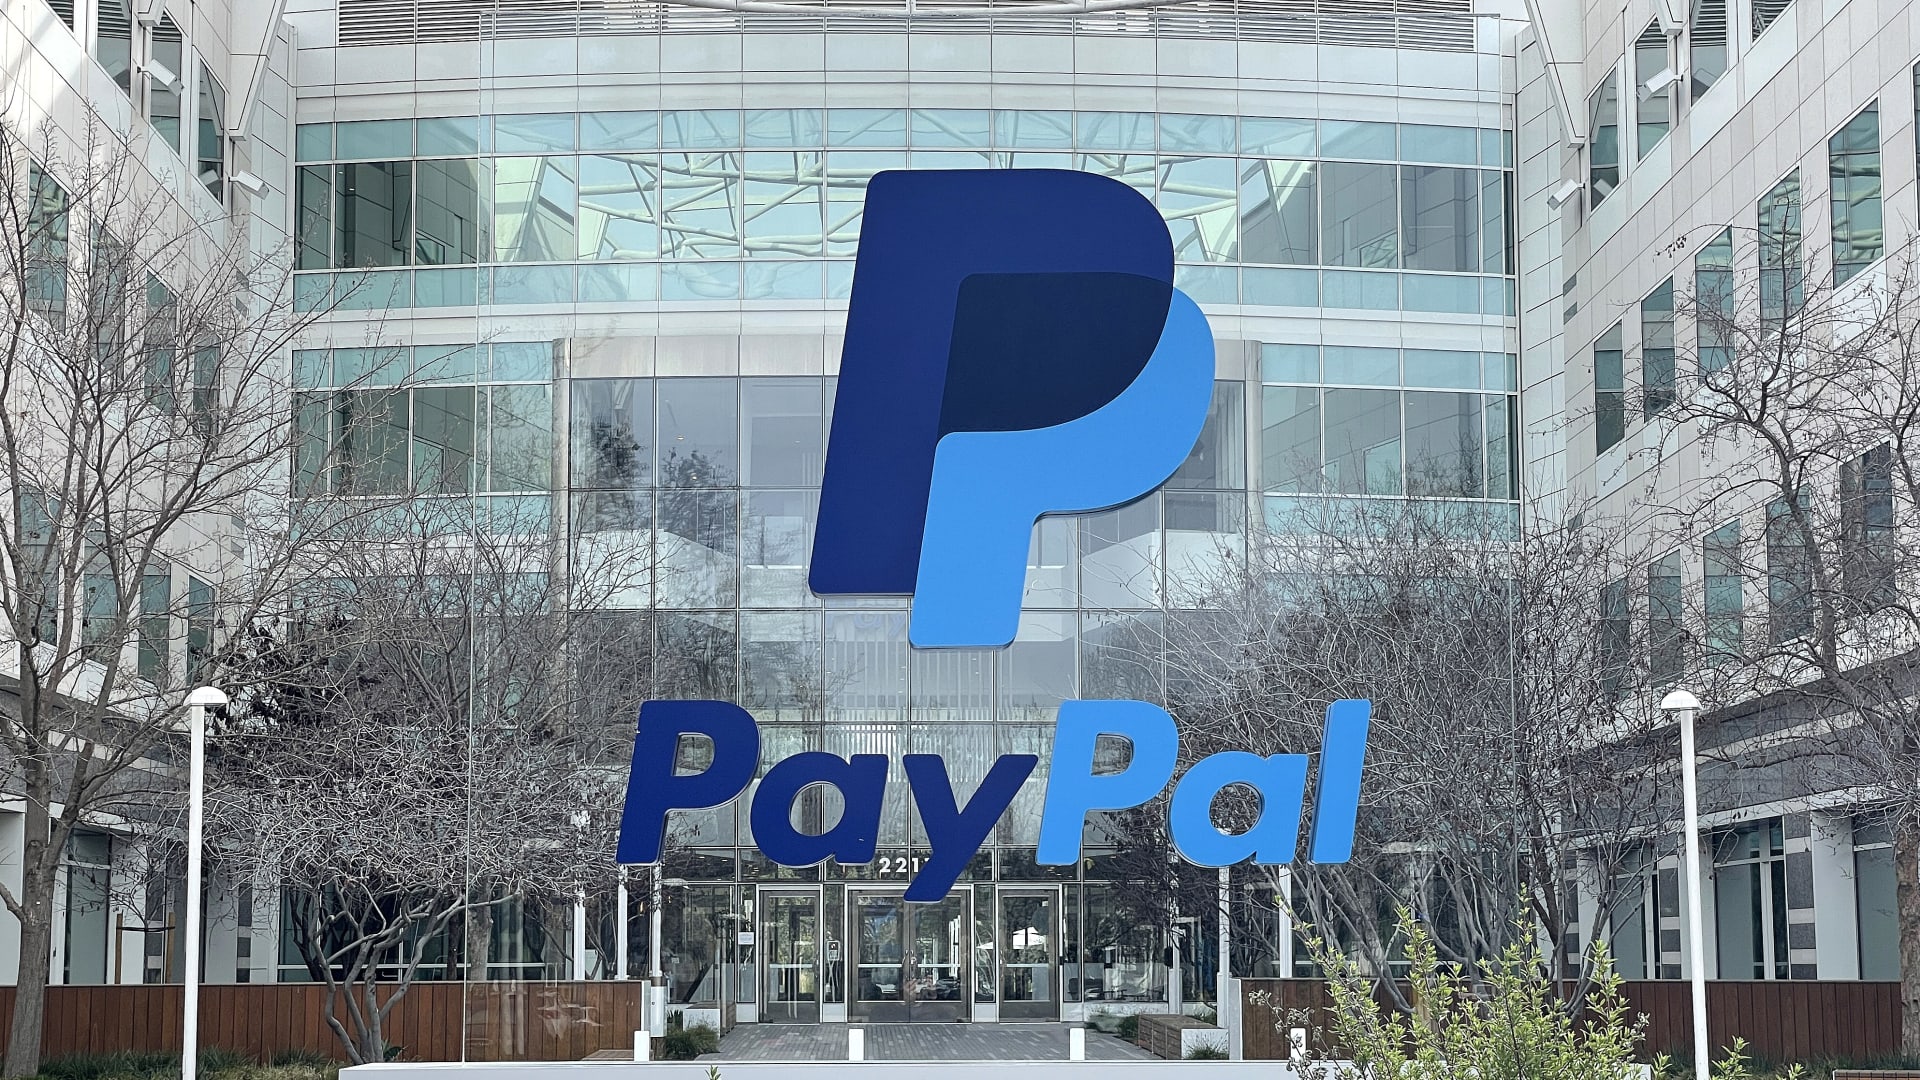 Raymond James downgrades PayPal, cites concern over potential market share decline